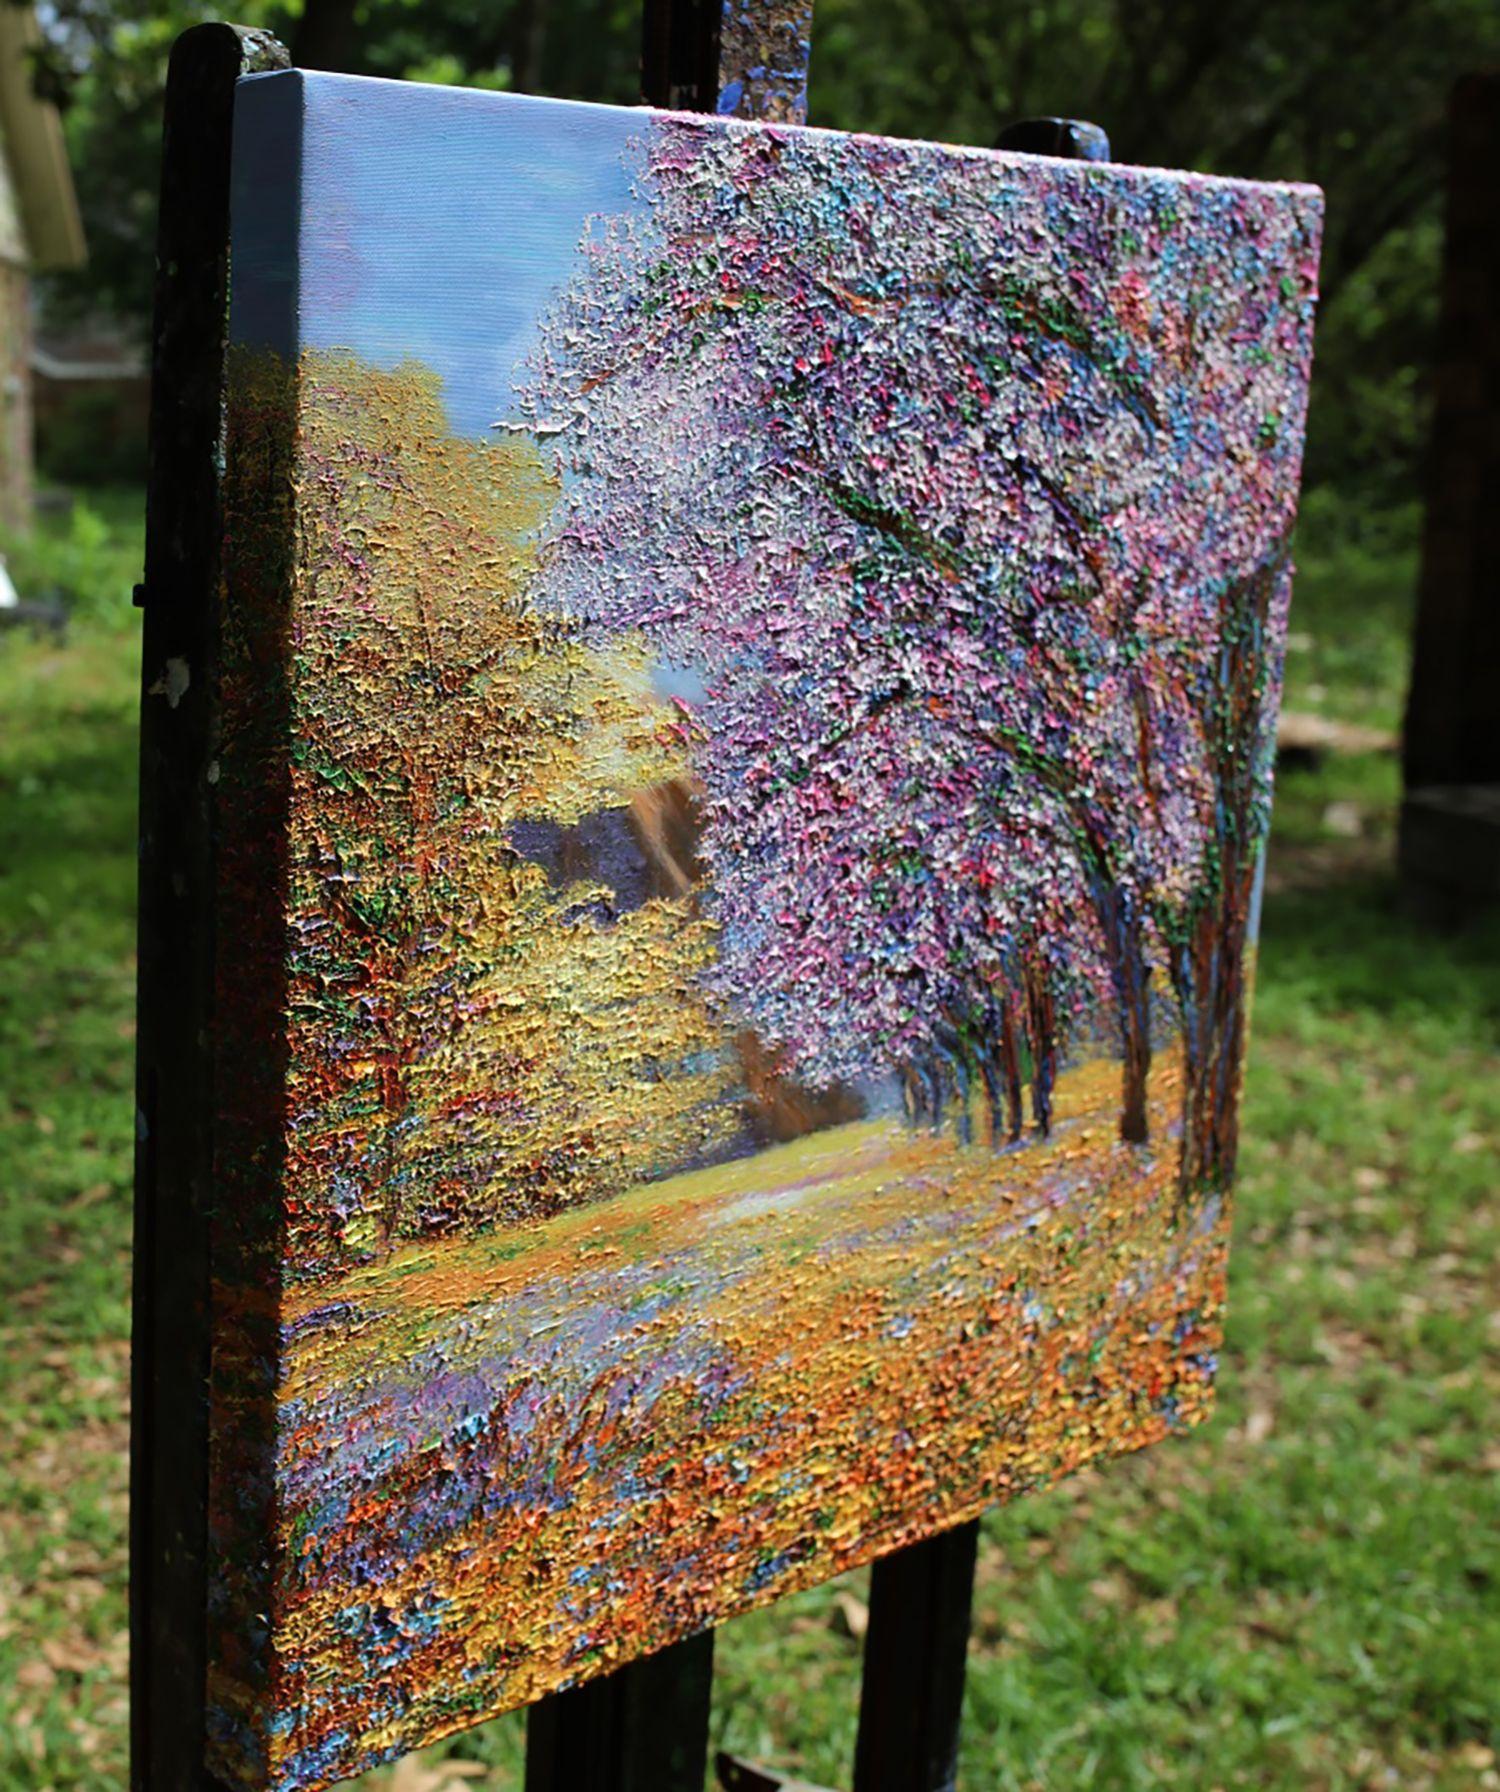 â€œIn California, the purple orchid tree is an amazing organism that displays its splendor with pride. This scene is from central California and the colors are astonishing. I hope I have done it justice with my work.â€    Oil on canvas rendition of